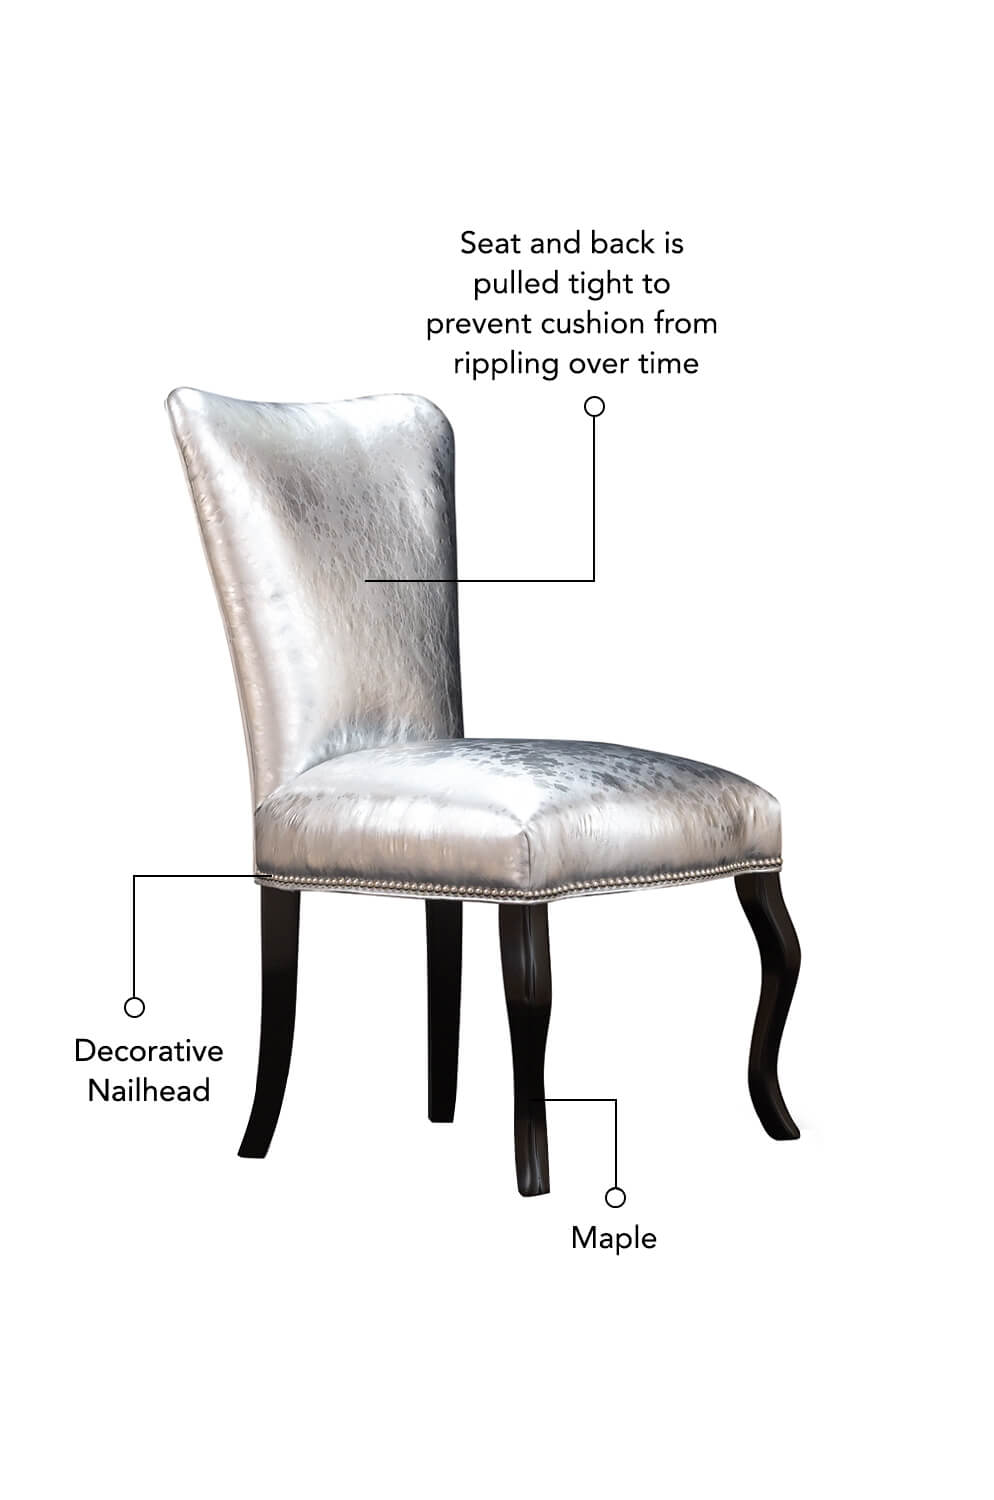 Seat and back is pulled tight to prevent cushion from rippling over time, features maple wood base and nailhead trim.